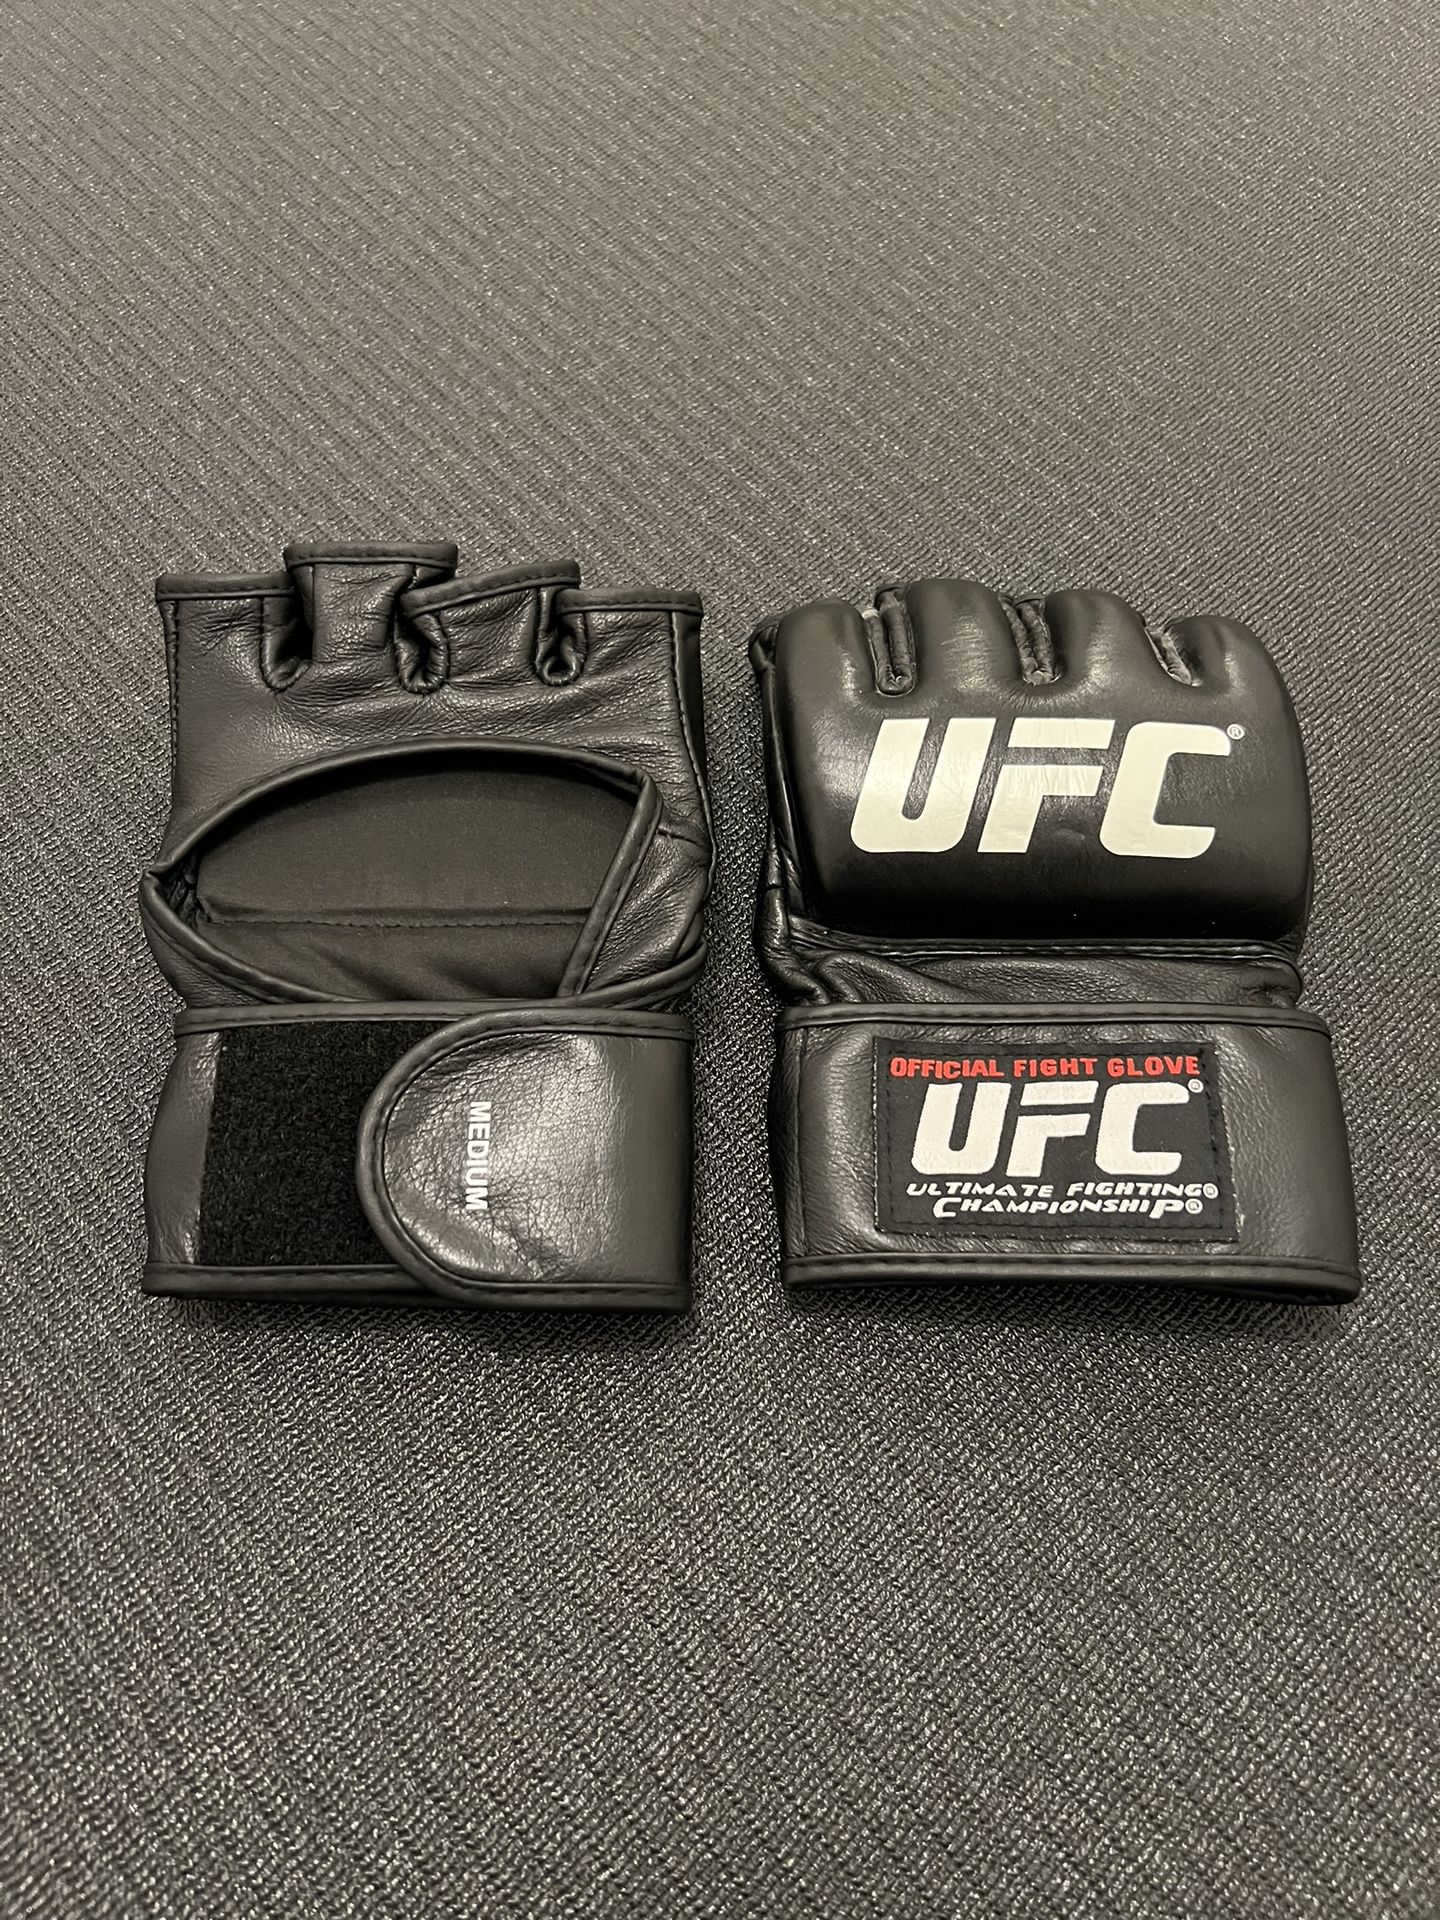 UFC official fight gloves from 2011, size Medium